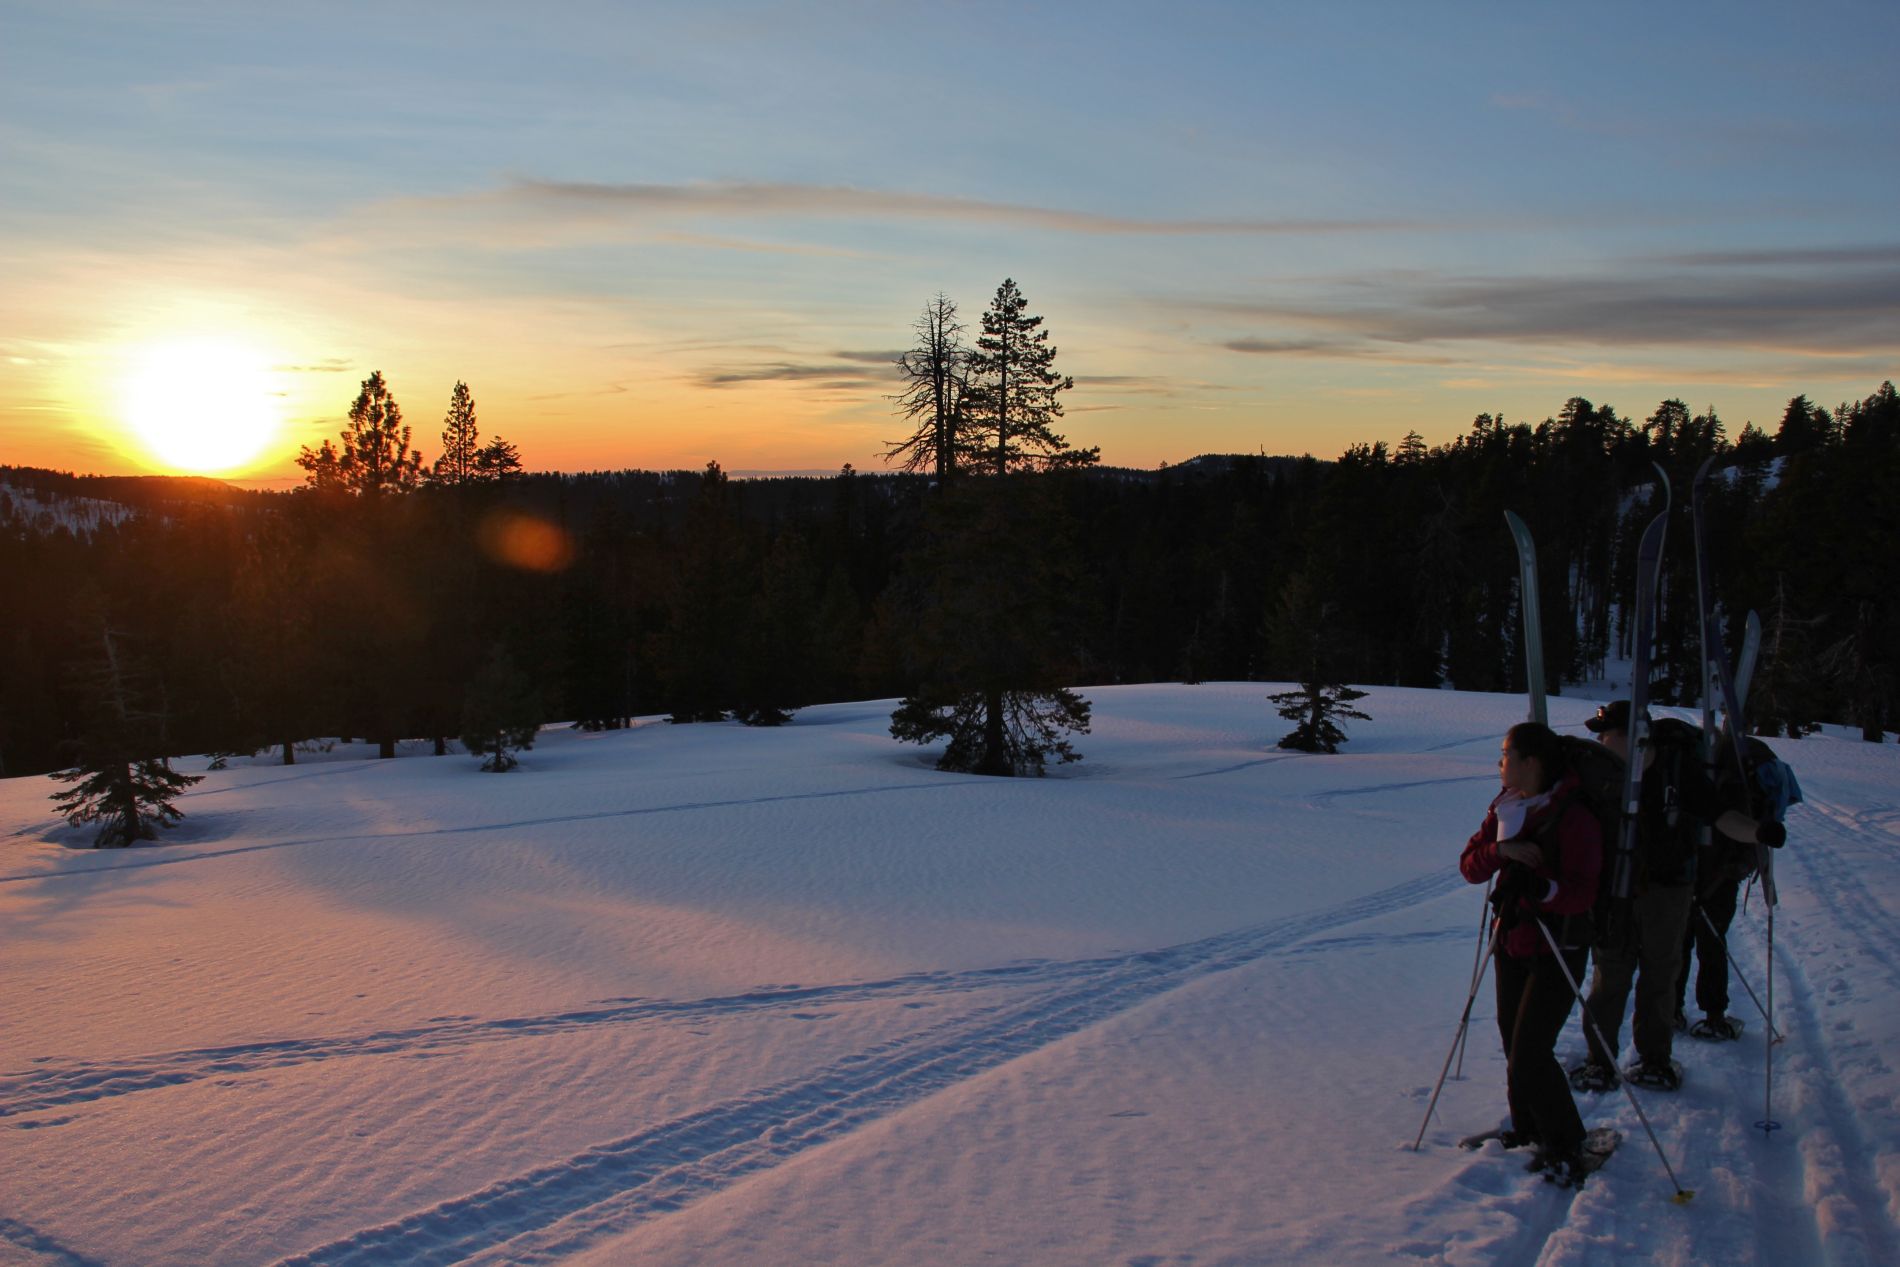 Skiers watch the sunset from Yosemite's Heart Attack Hill.